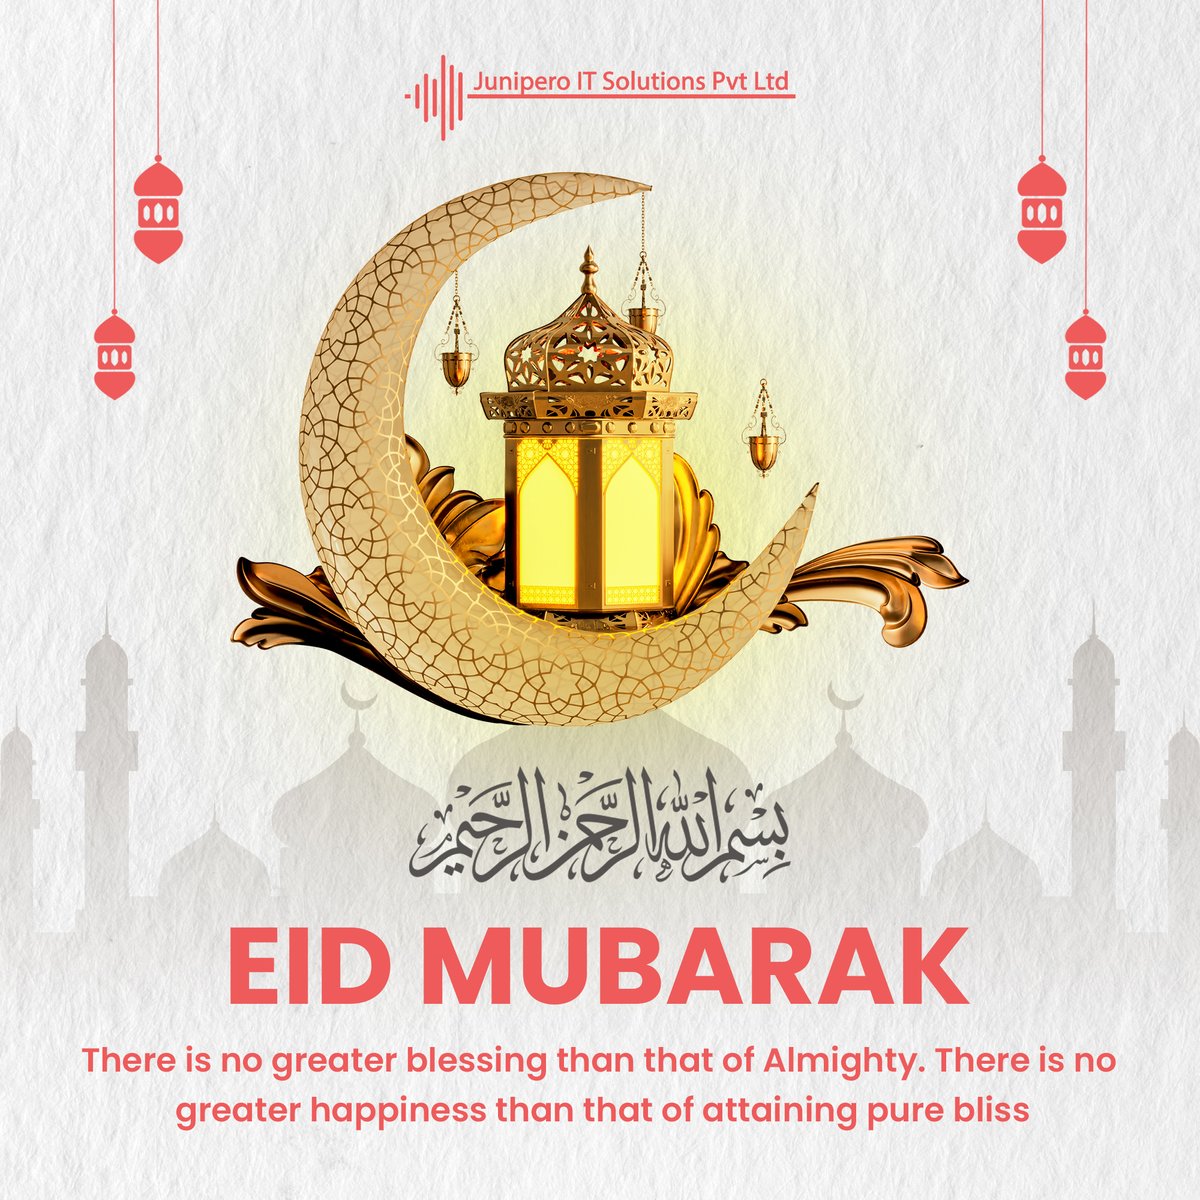 It is a day of rejoicing and bliss, it is a day of blessing and peace, it is a day to reflect and ponder. Most of all, it is a day to celebrate together. Eid Mubarak.
-
-
-
#eidmubarak2024 #eid #eid2024 #eidmubarak🌙 #growwithjunipero #EidMubarakEveryone